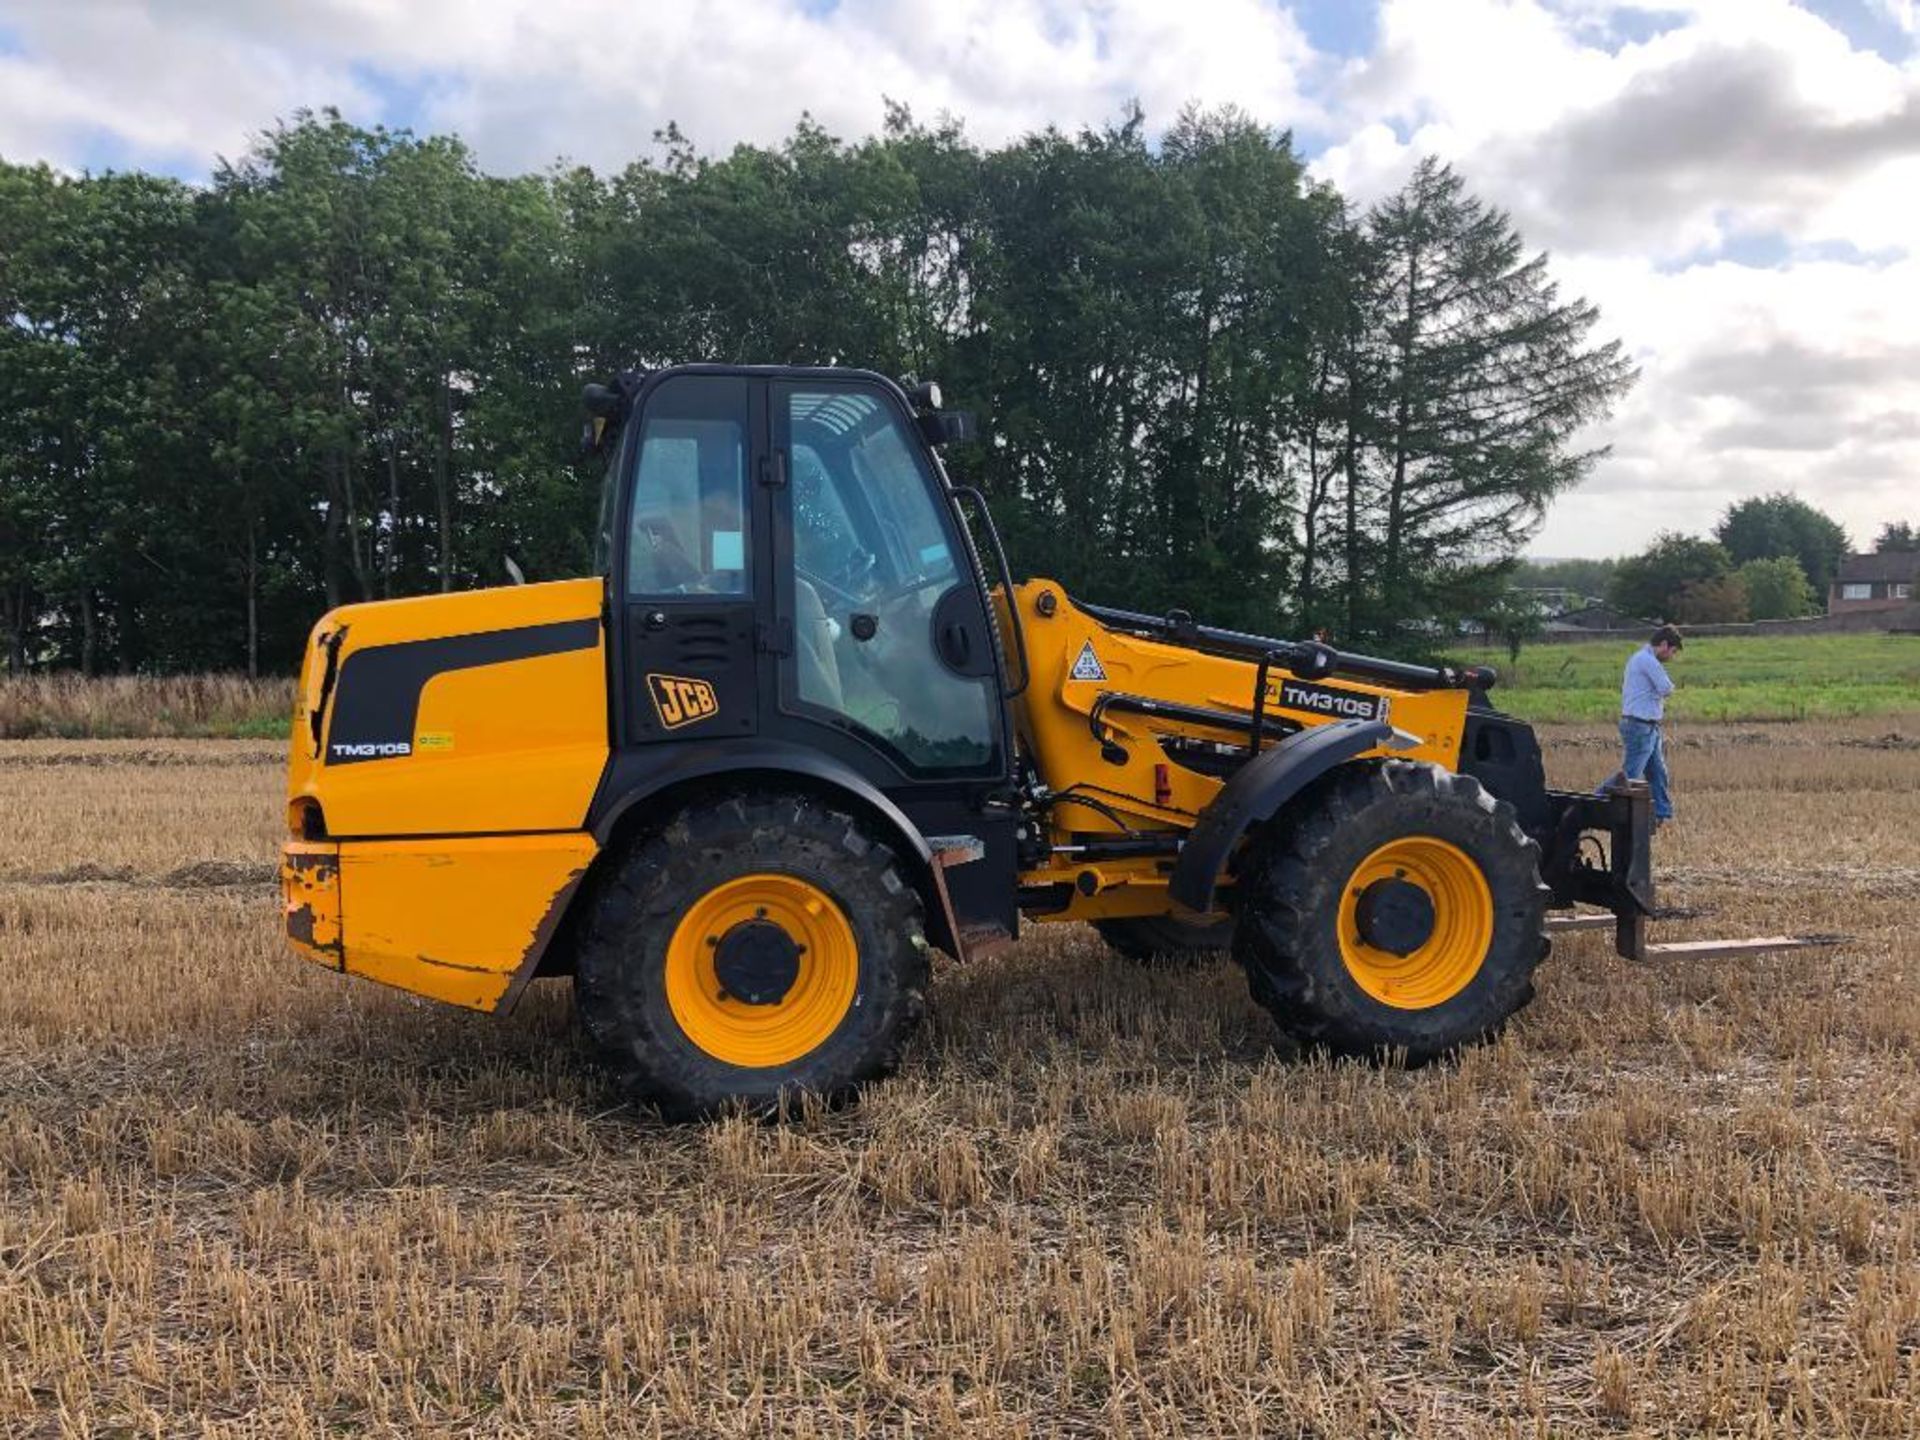 2010 JCB TM310S Agri pivot steer materials handler on 460/70R42 wheels and tyres with pallet tines, - Image 9 of 15